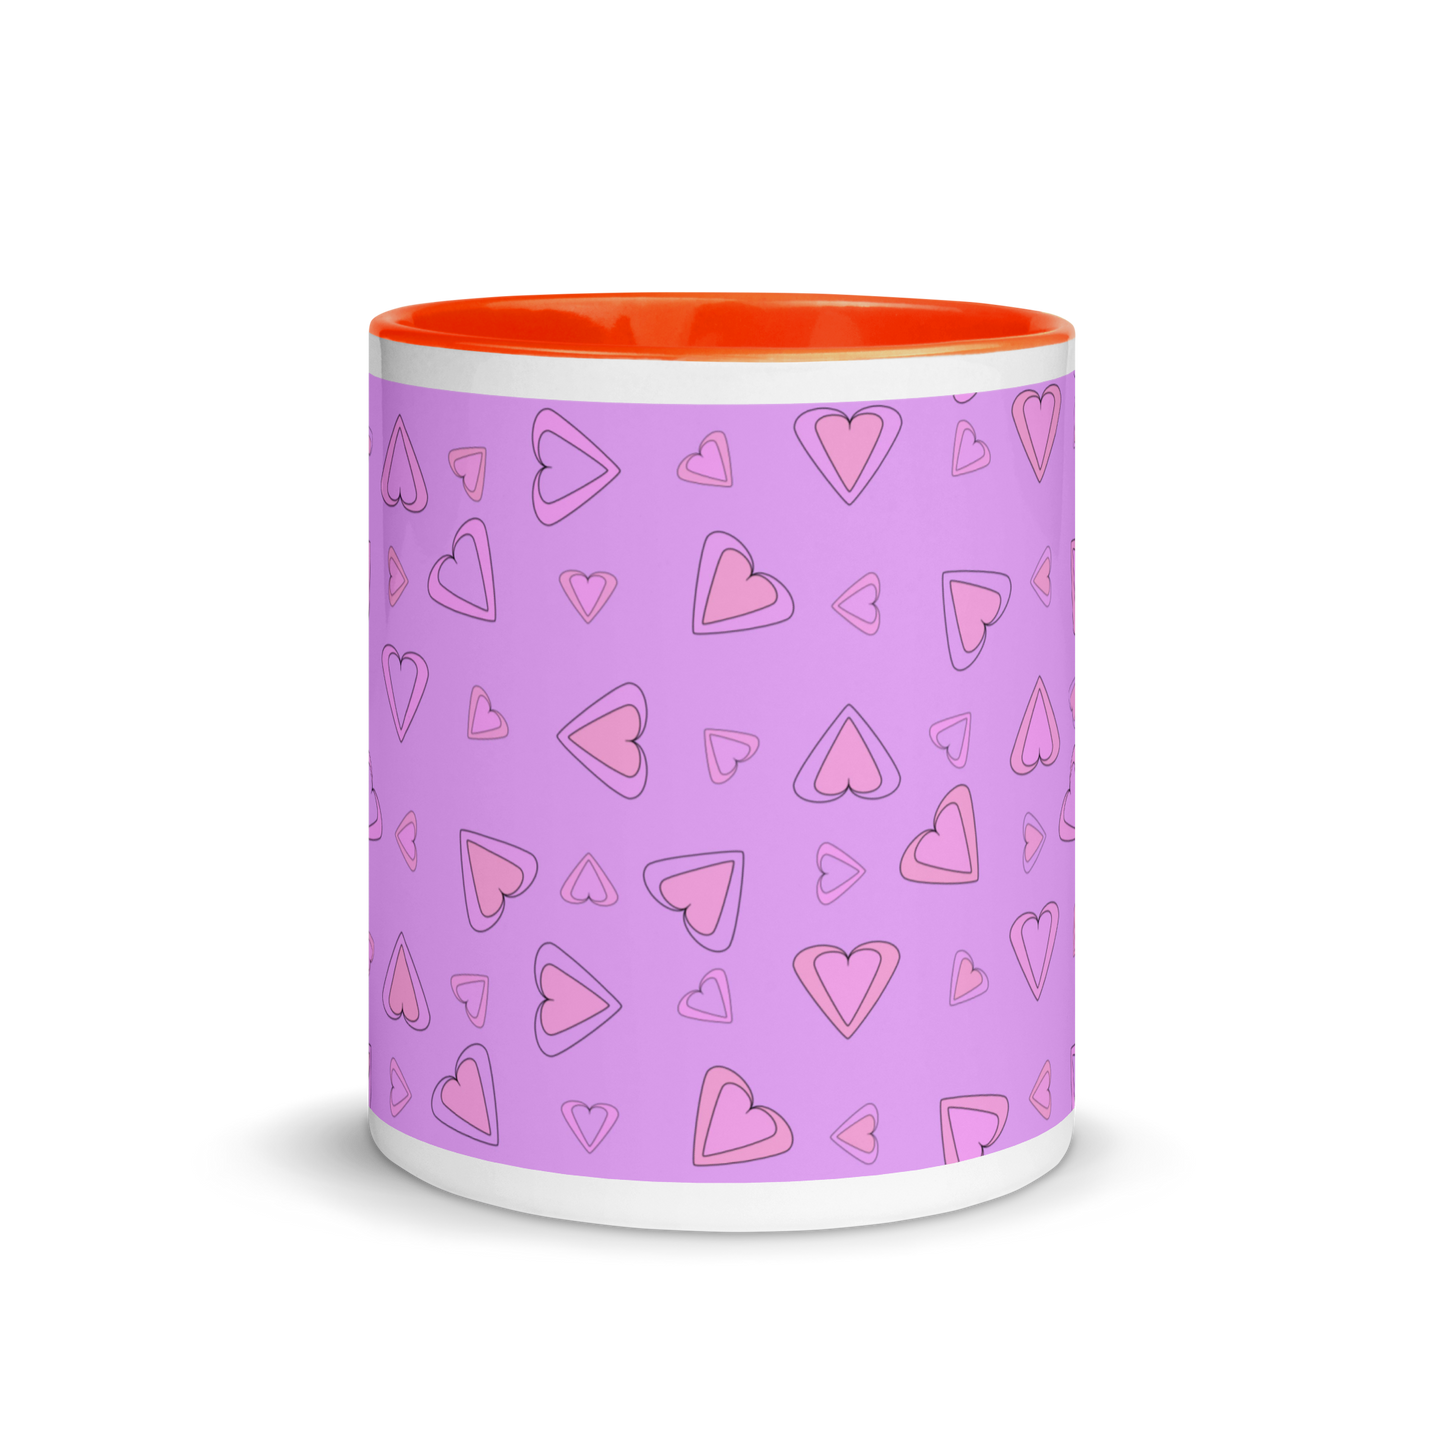 Rainbow Of Hearts | Batch 01 | Seamless Patterns | White Ceramic Mug with Color Inside - #8